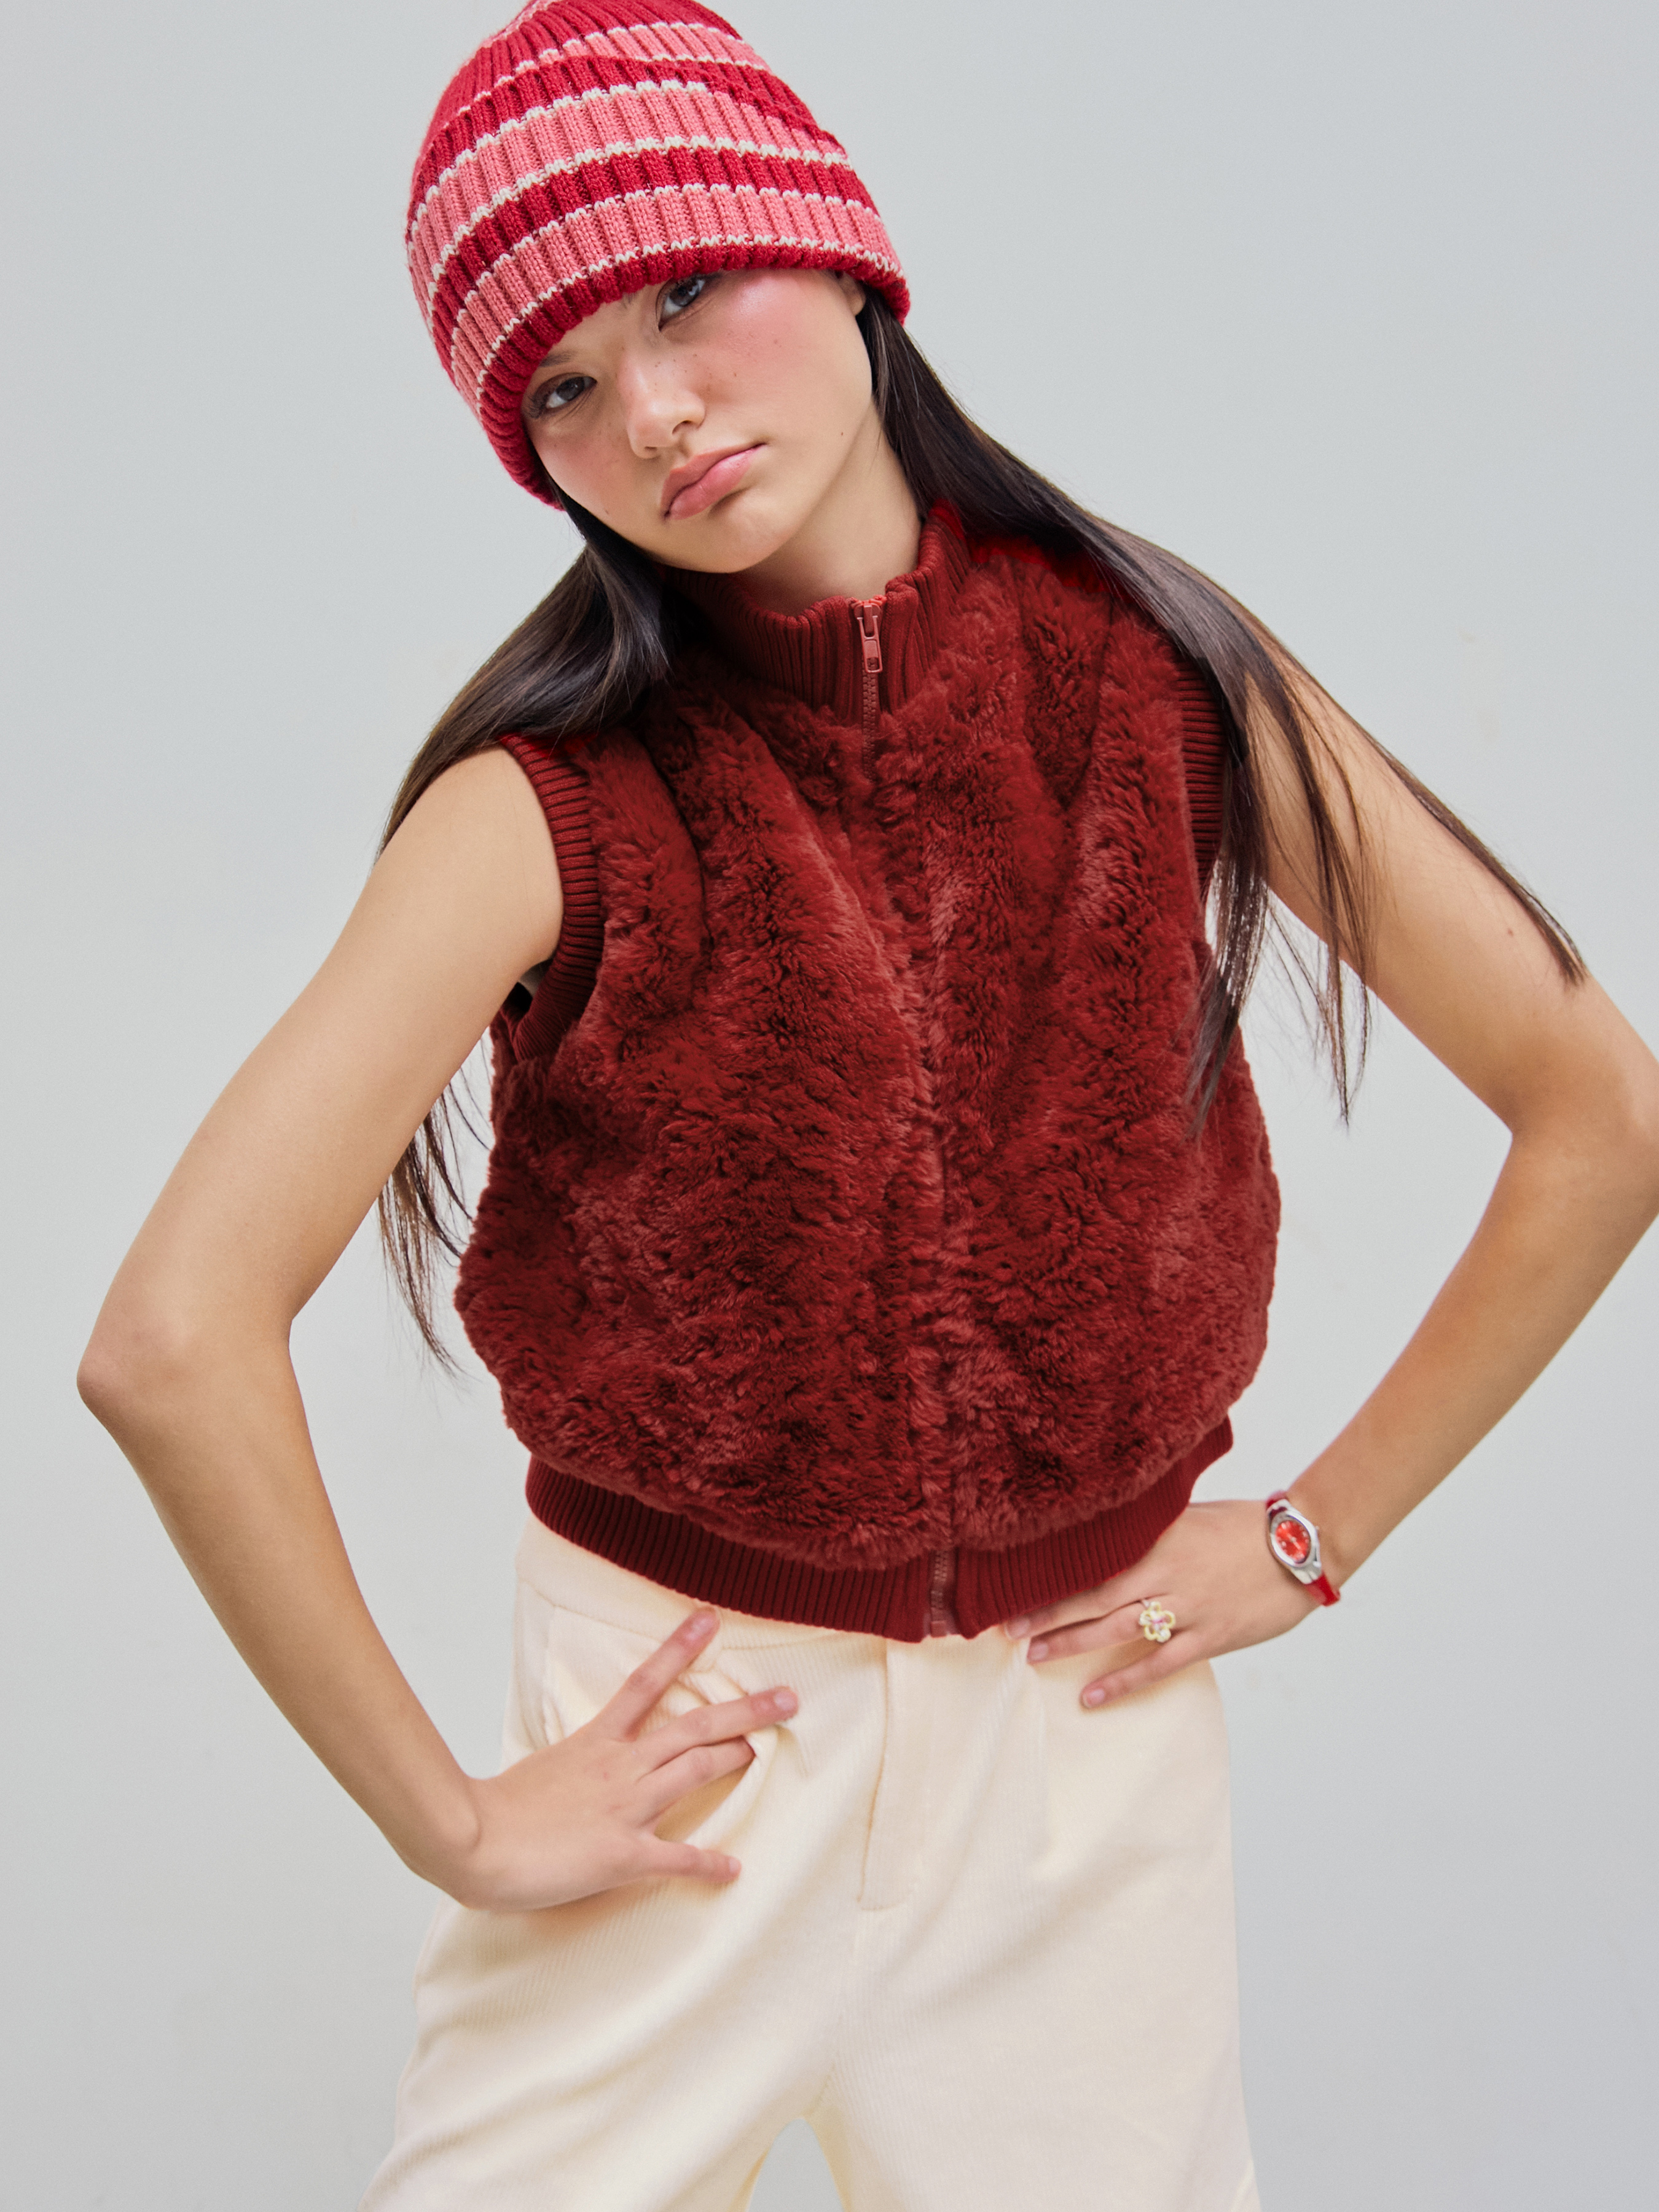 Faux Fur Vest with Zipper from Surell Accessories